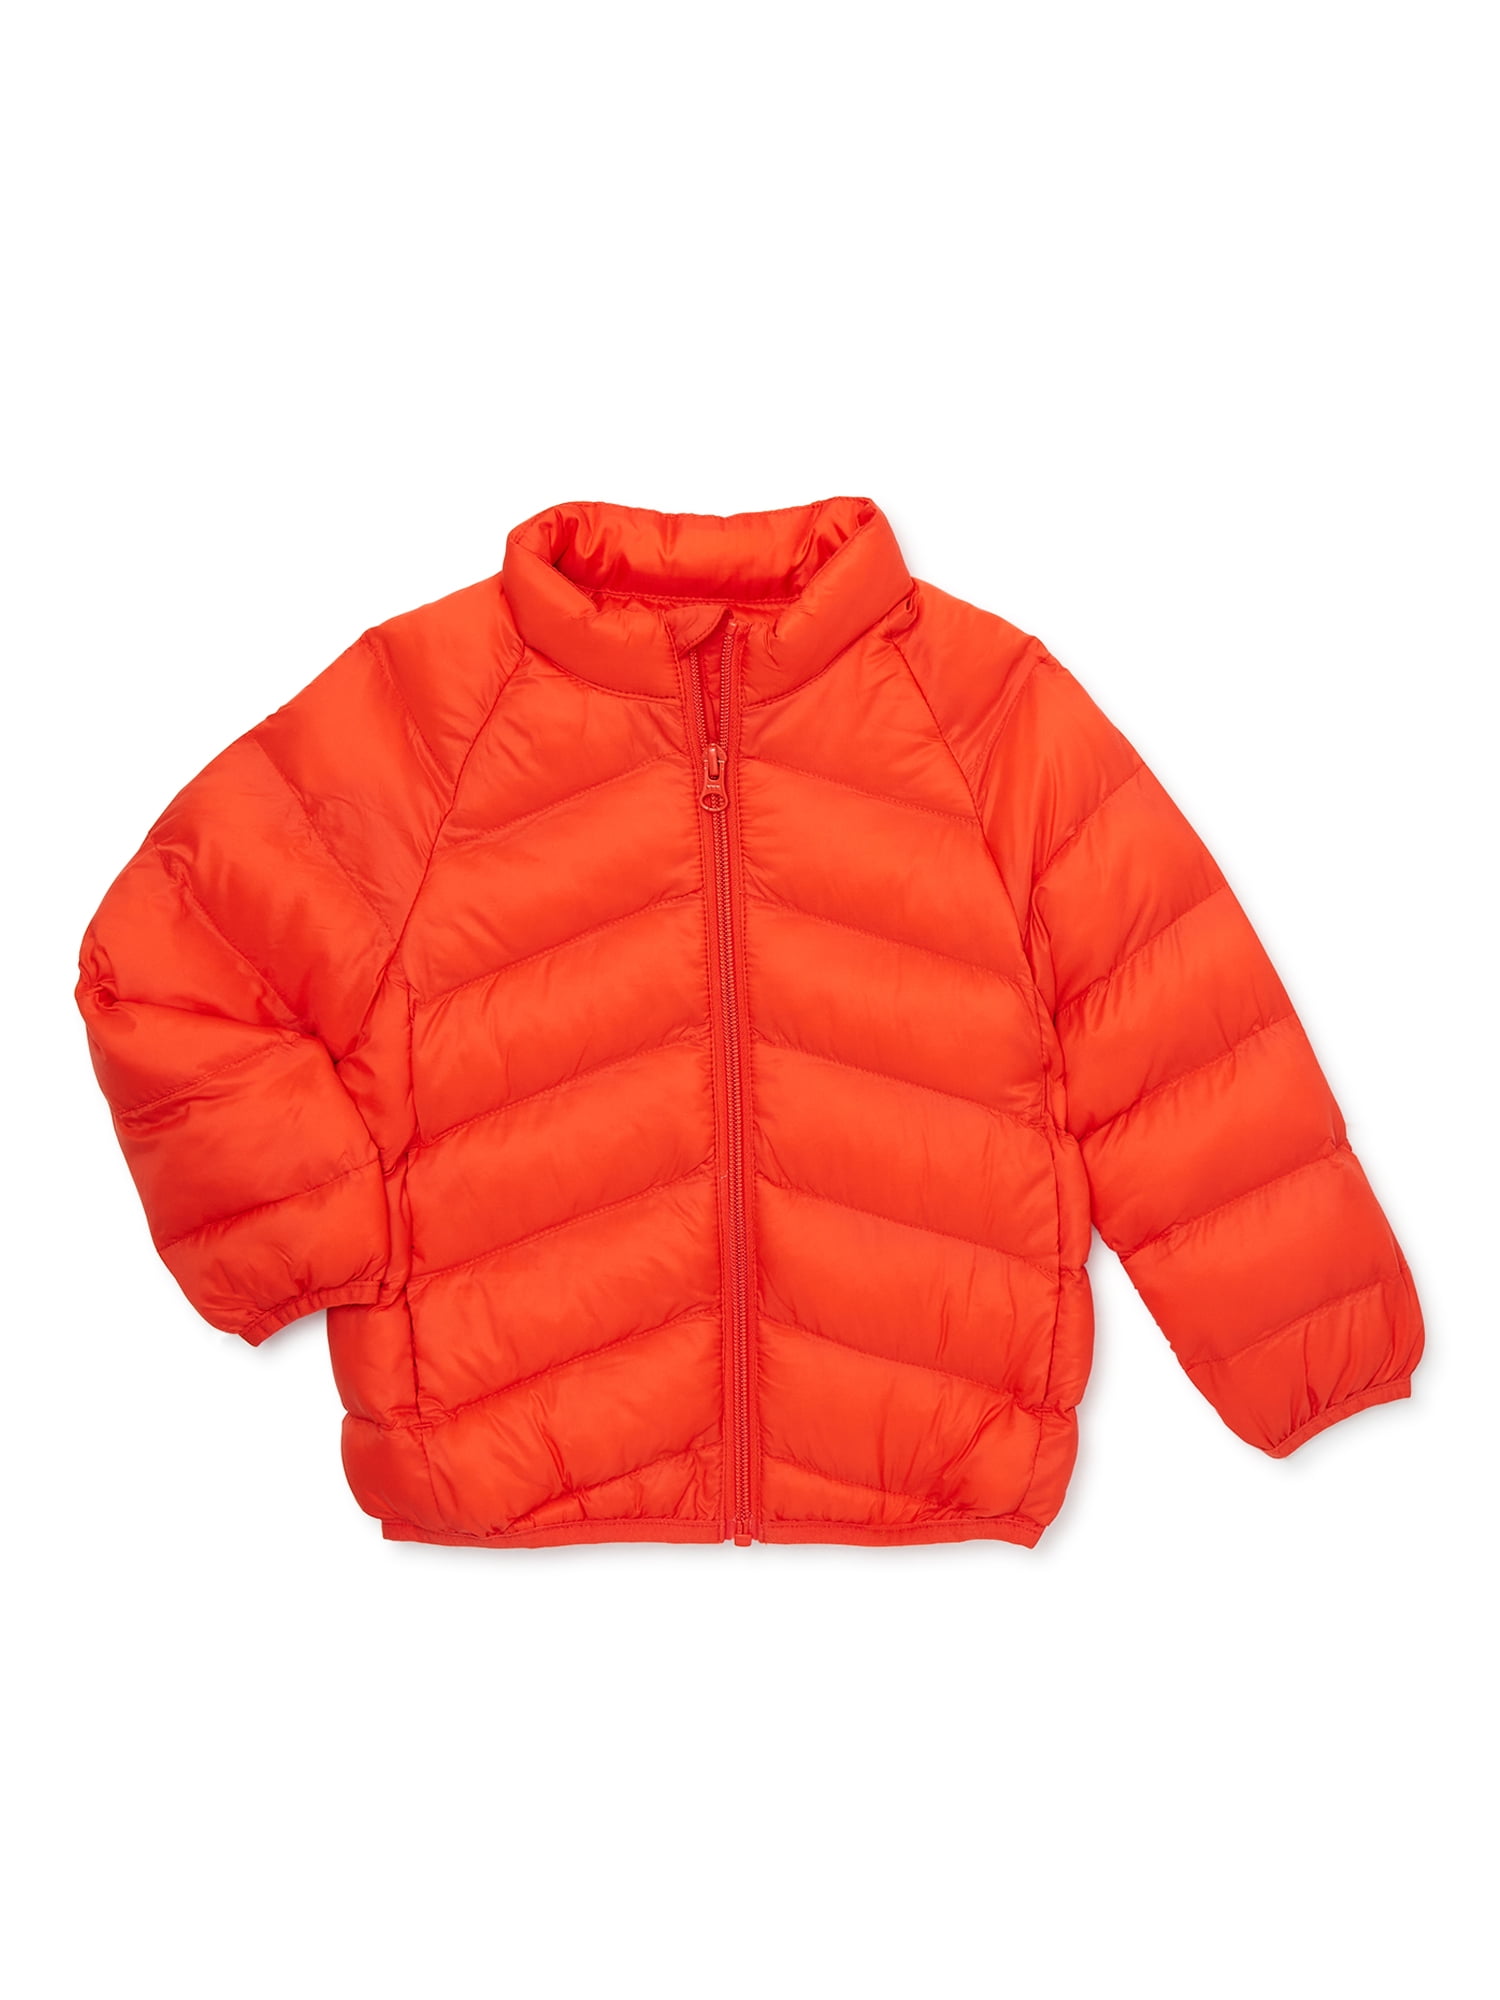 Wonder Nation Baby and Toddler Packable Puffer Jacket, Sizes 0/3M-5T